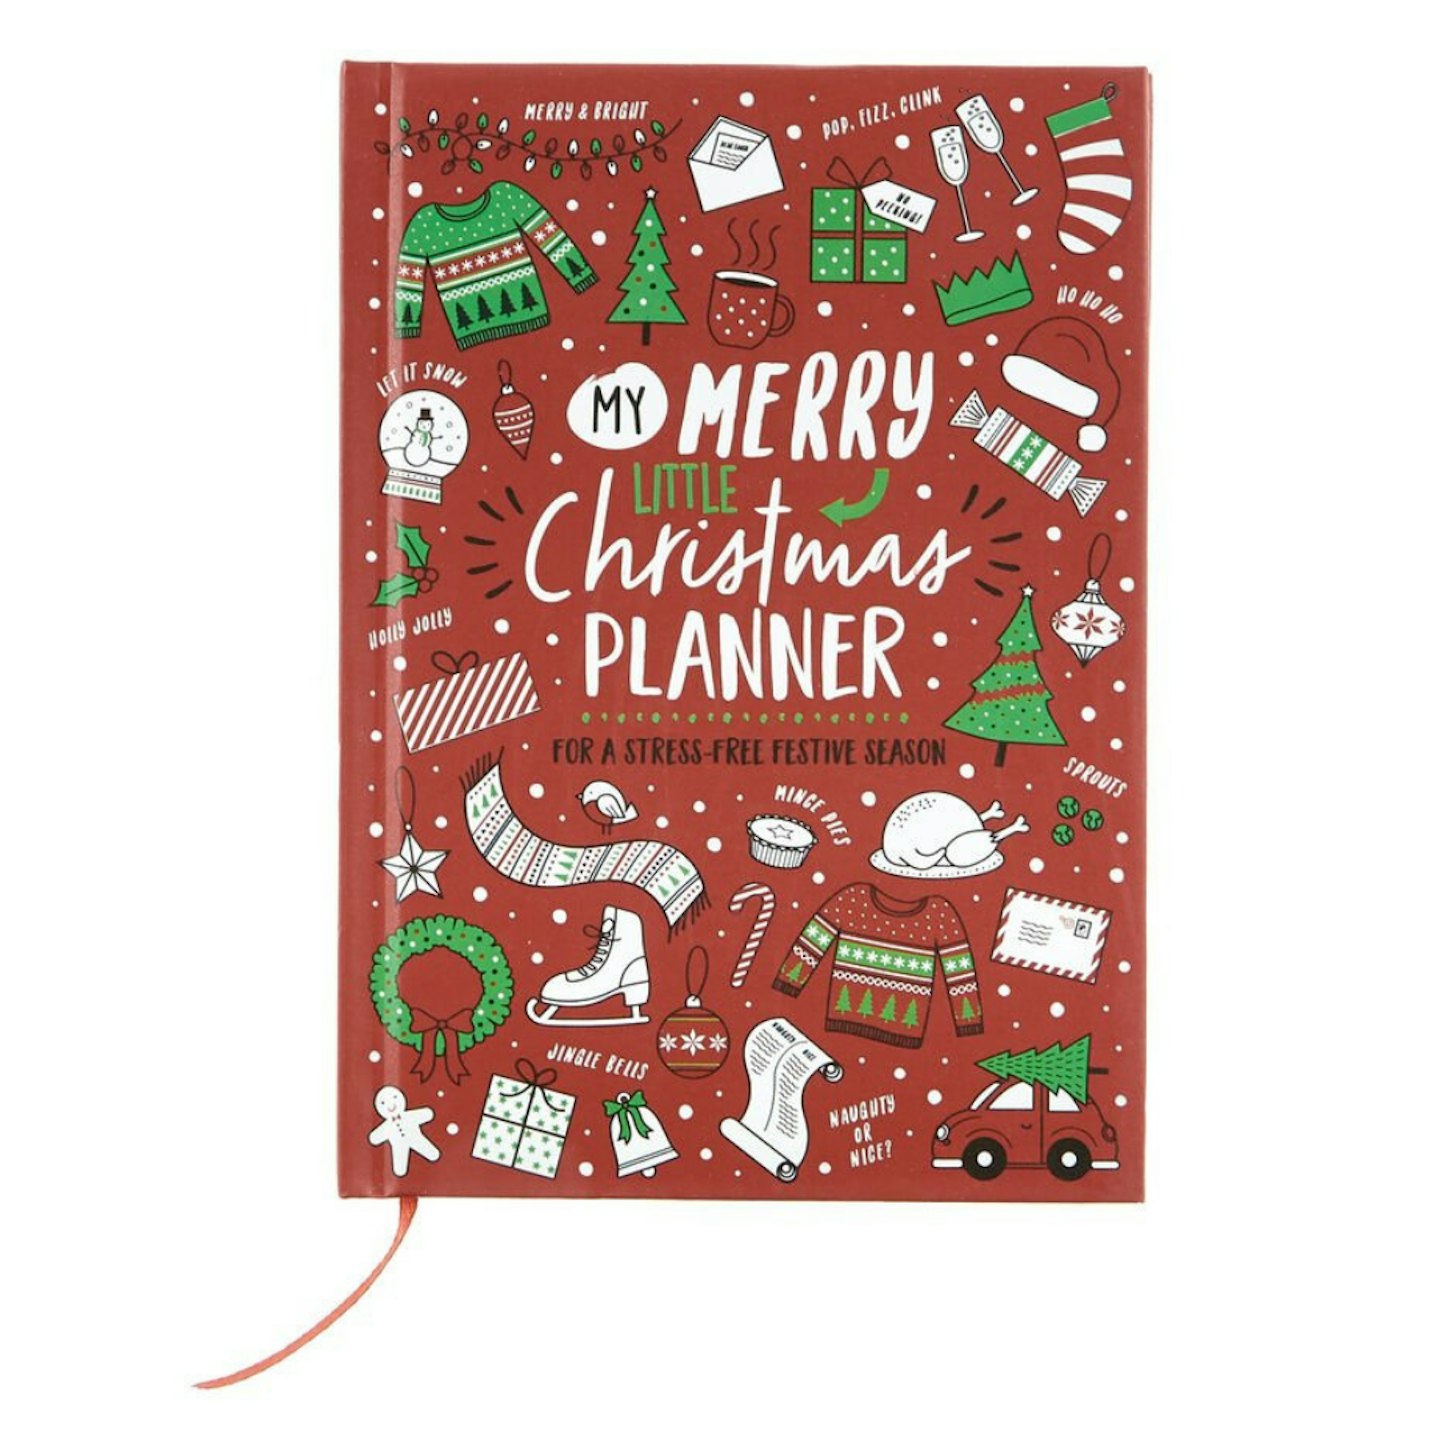 Best Christmas planners: Christmas planner book